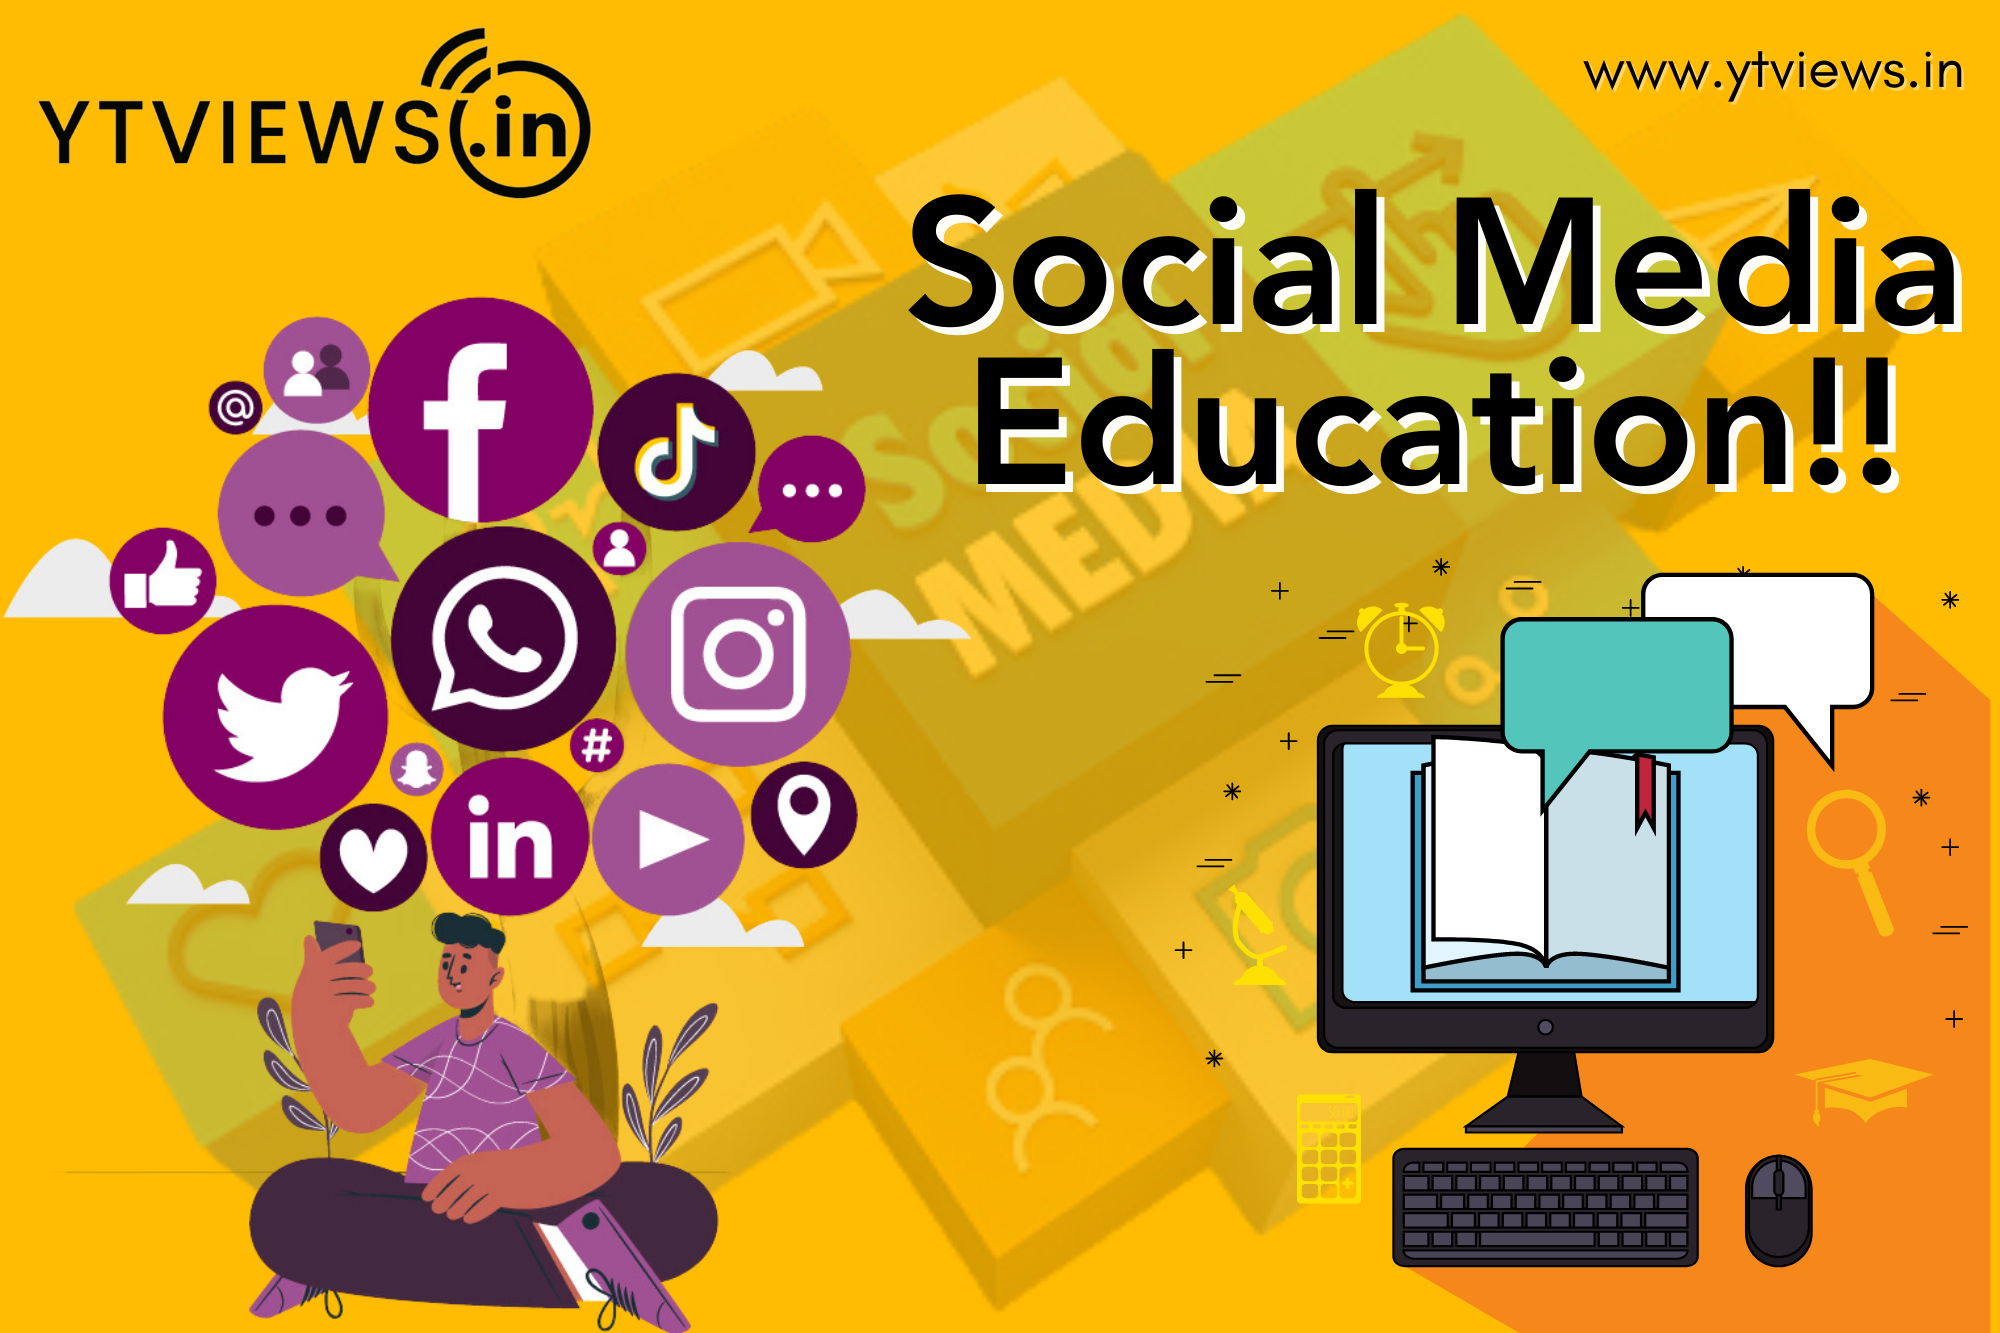 Social Media has become a great career option resulting in its need in the education sector